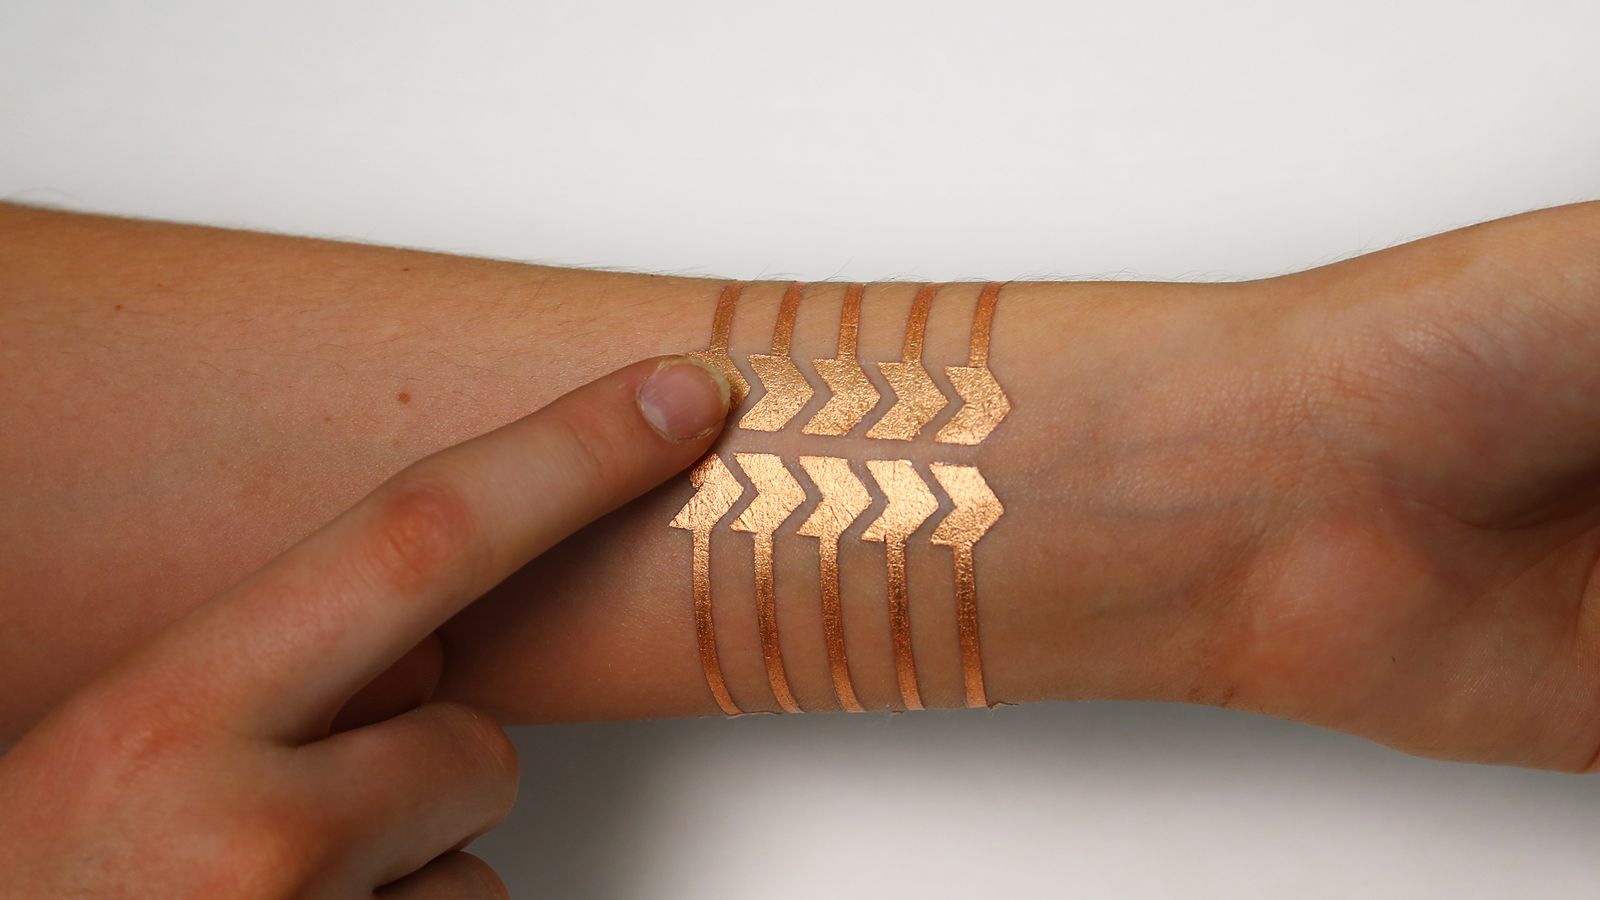 MIT and Microsoft Research made a 'smart' tattoo that remotely controls